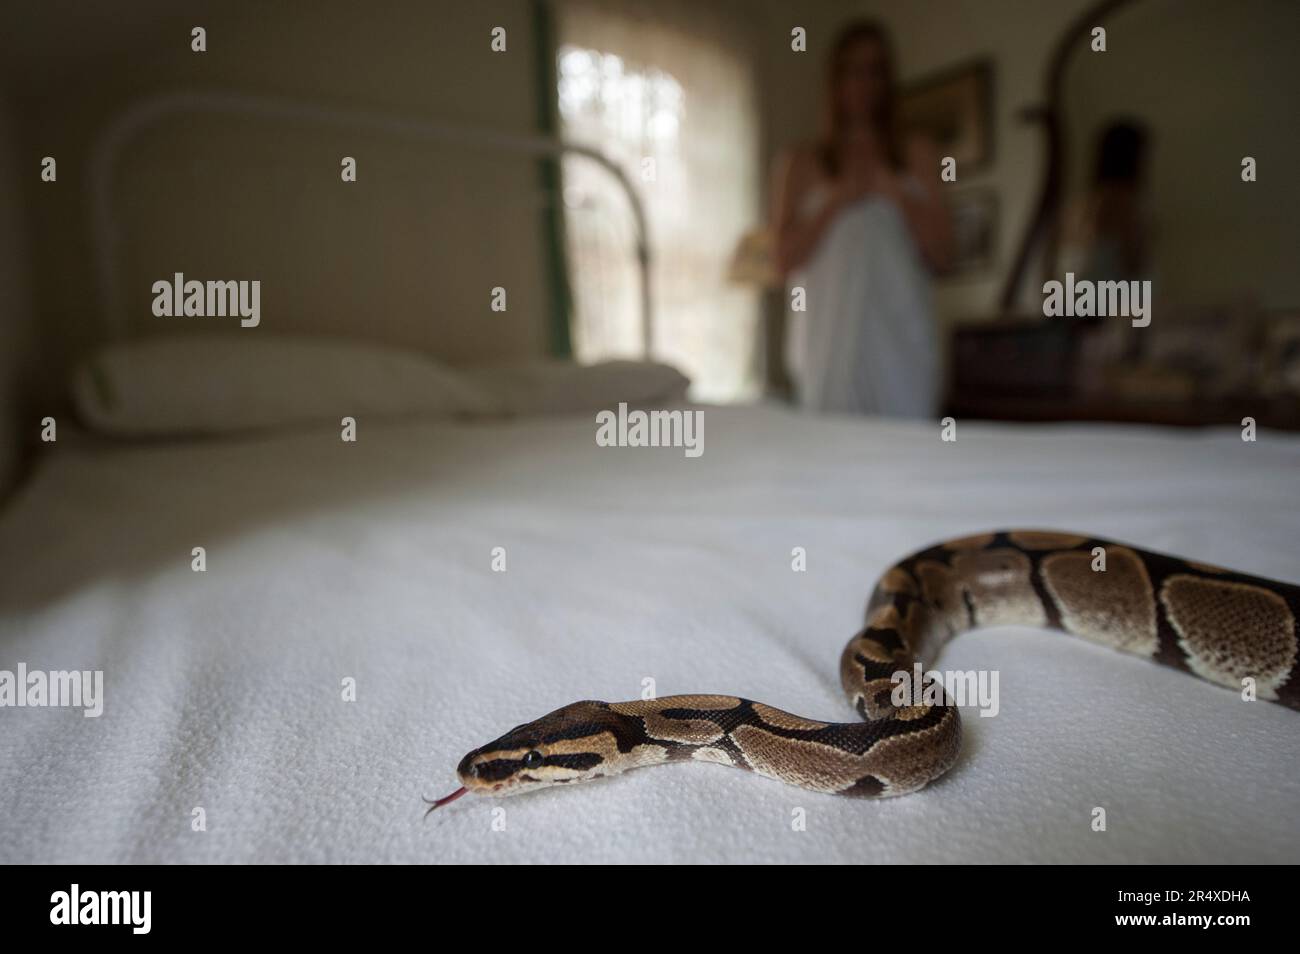 Young woman looks at a Ball python (Python regius) on a bed in a bedroom; Lincoln, Nebraska, United States of America Stock Photo